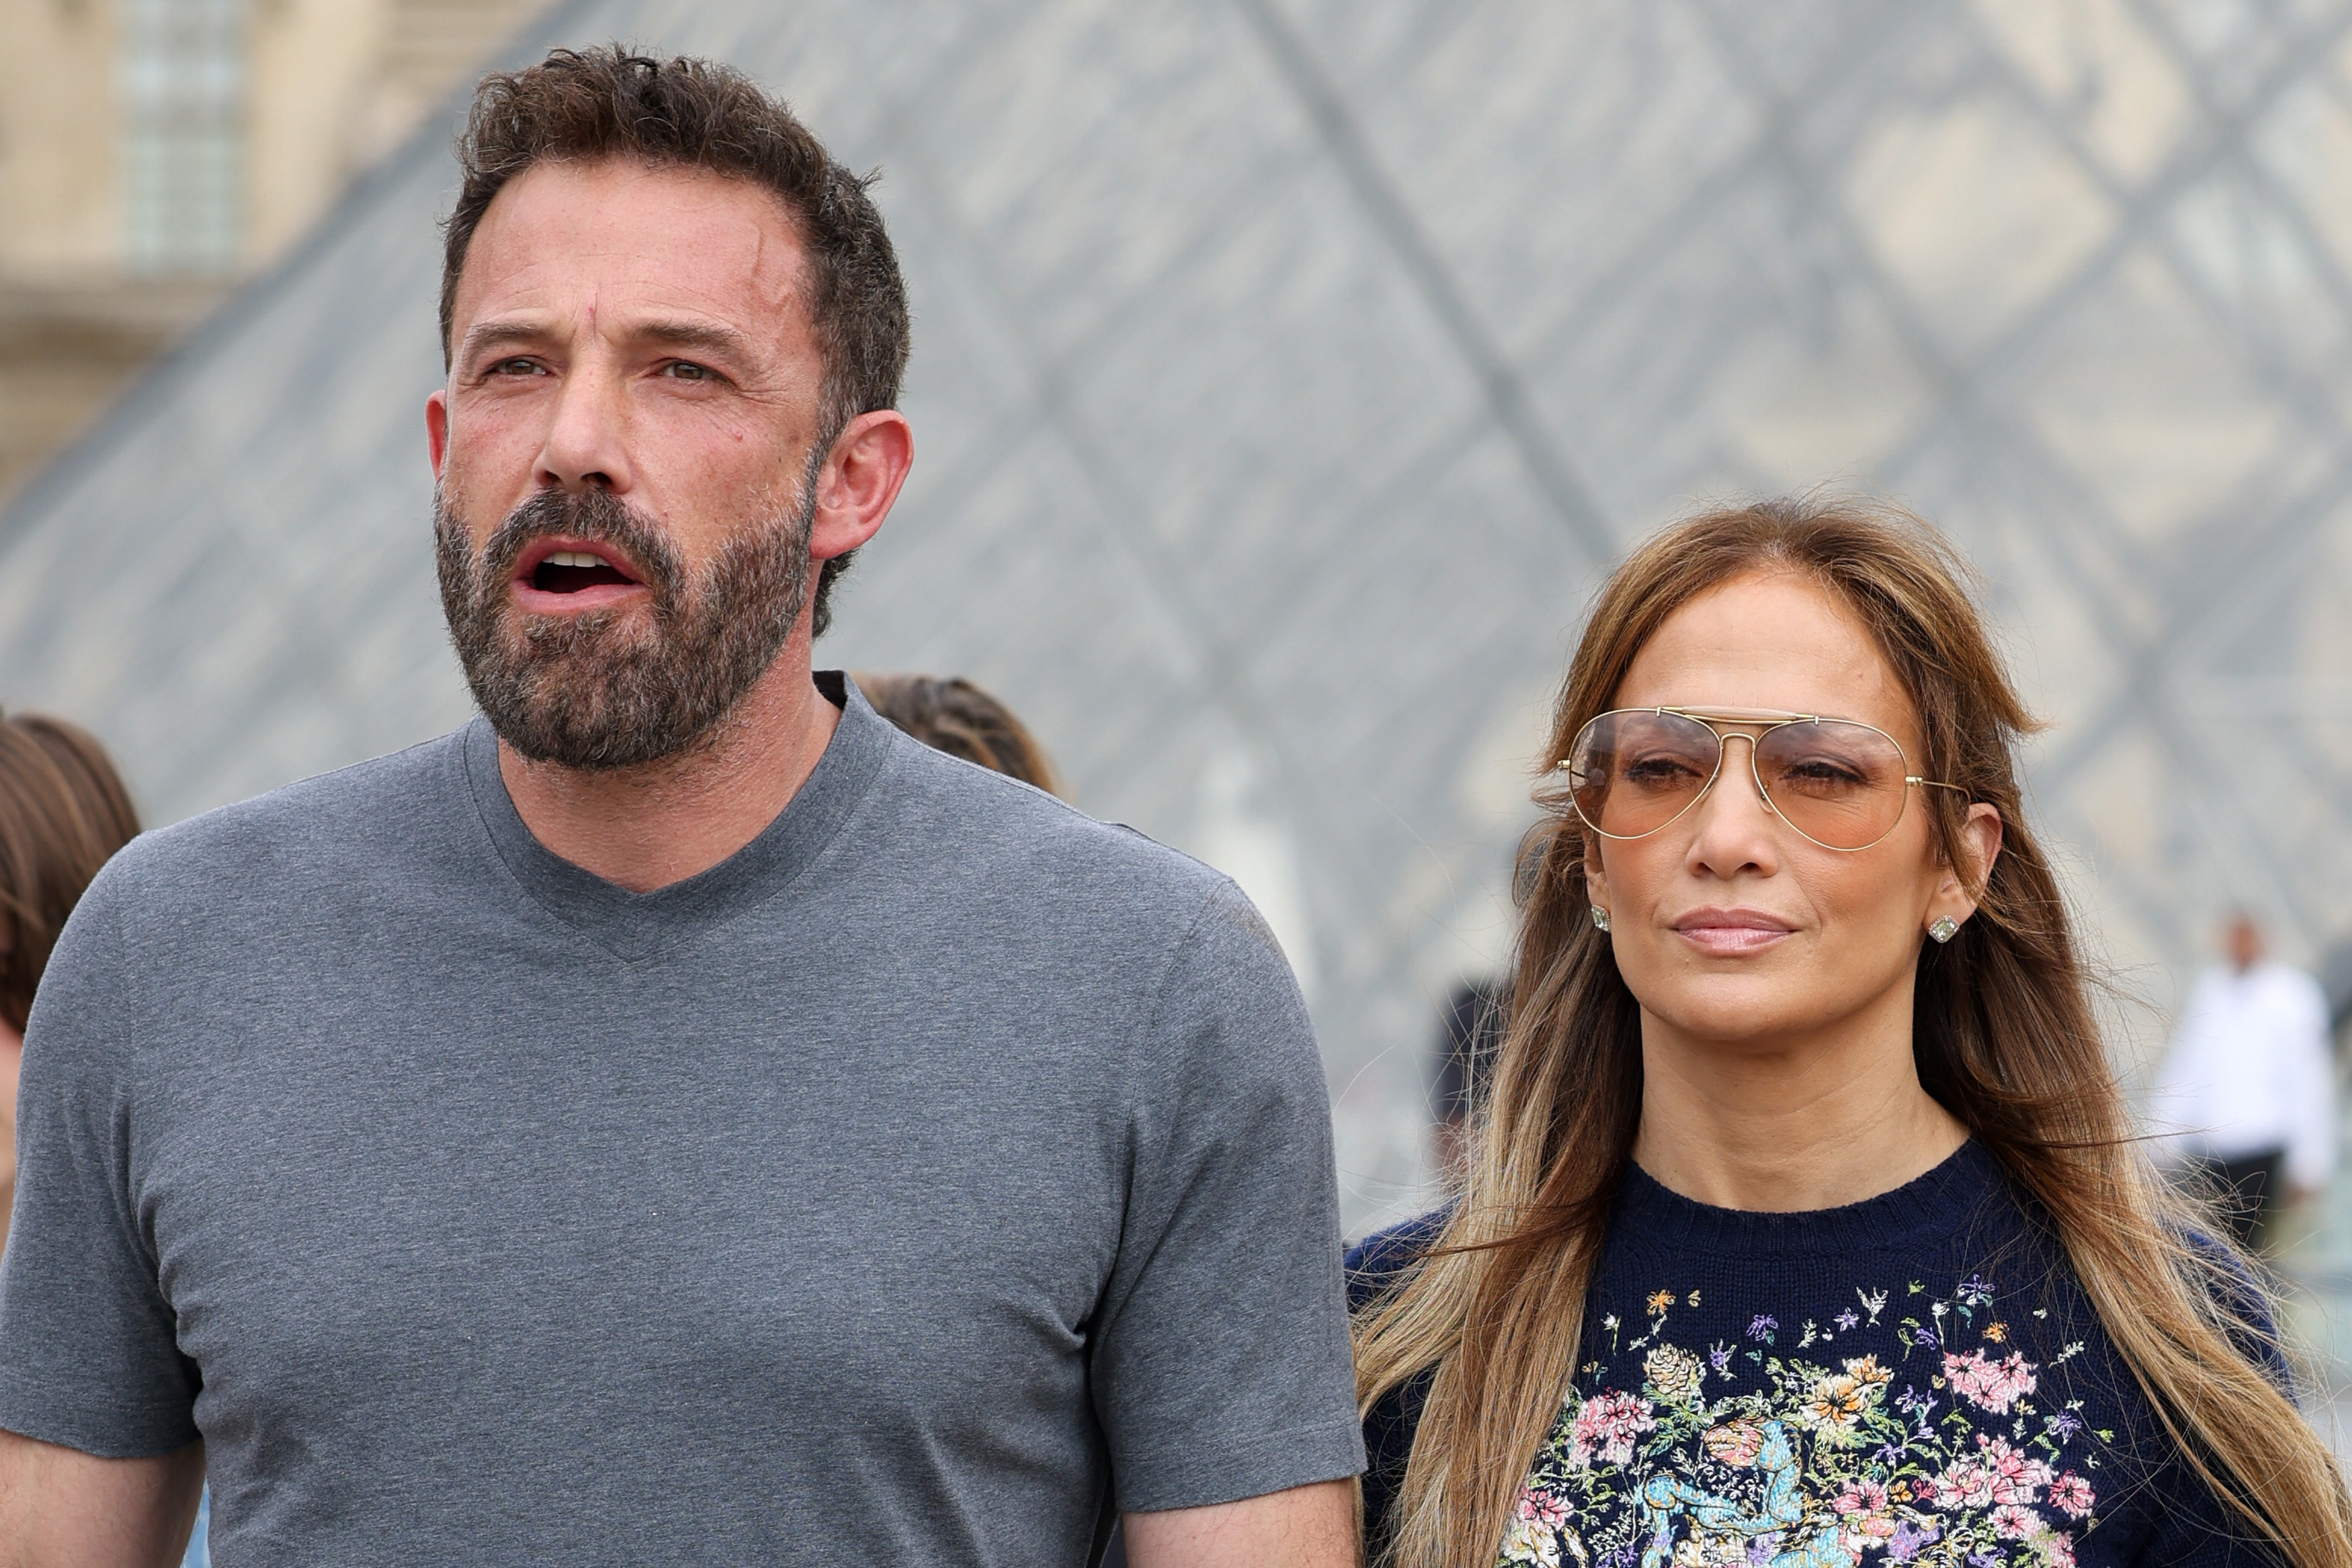 Jennifer Lopez and Ben Affleck are seen at the Louvre Museum on July 26, 2022 in Paris, France. | Source: Getty Images